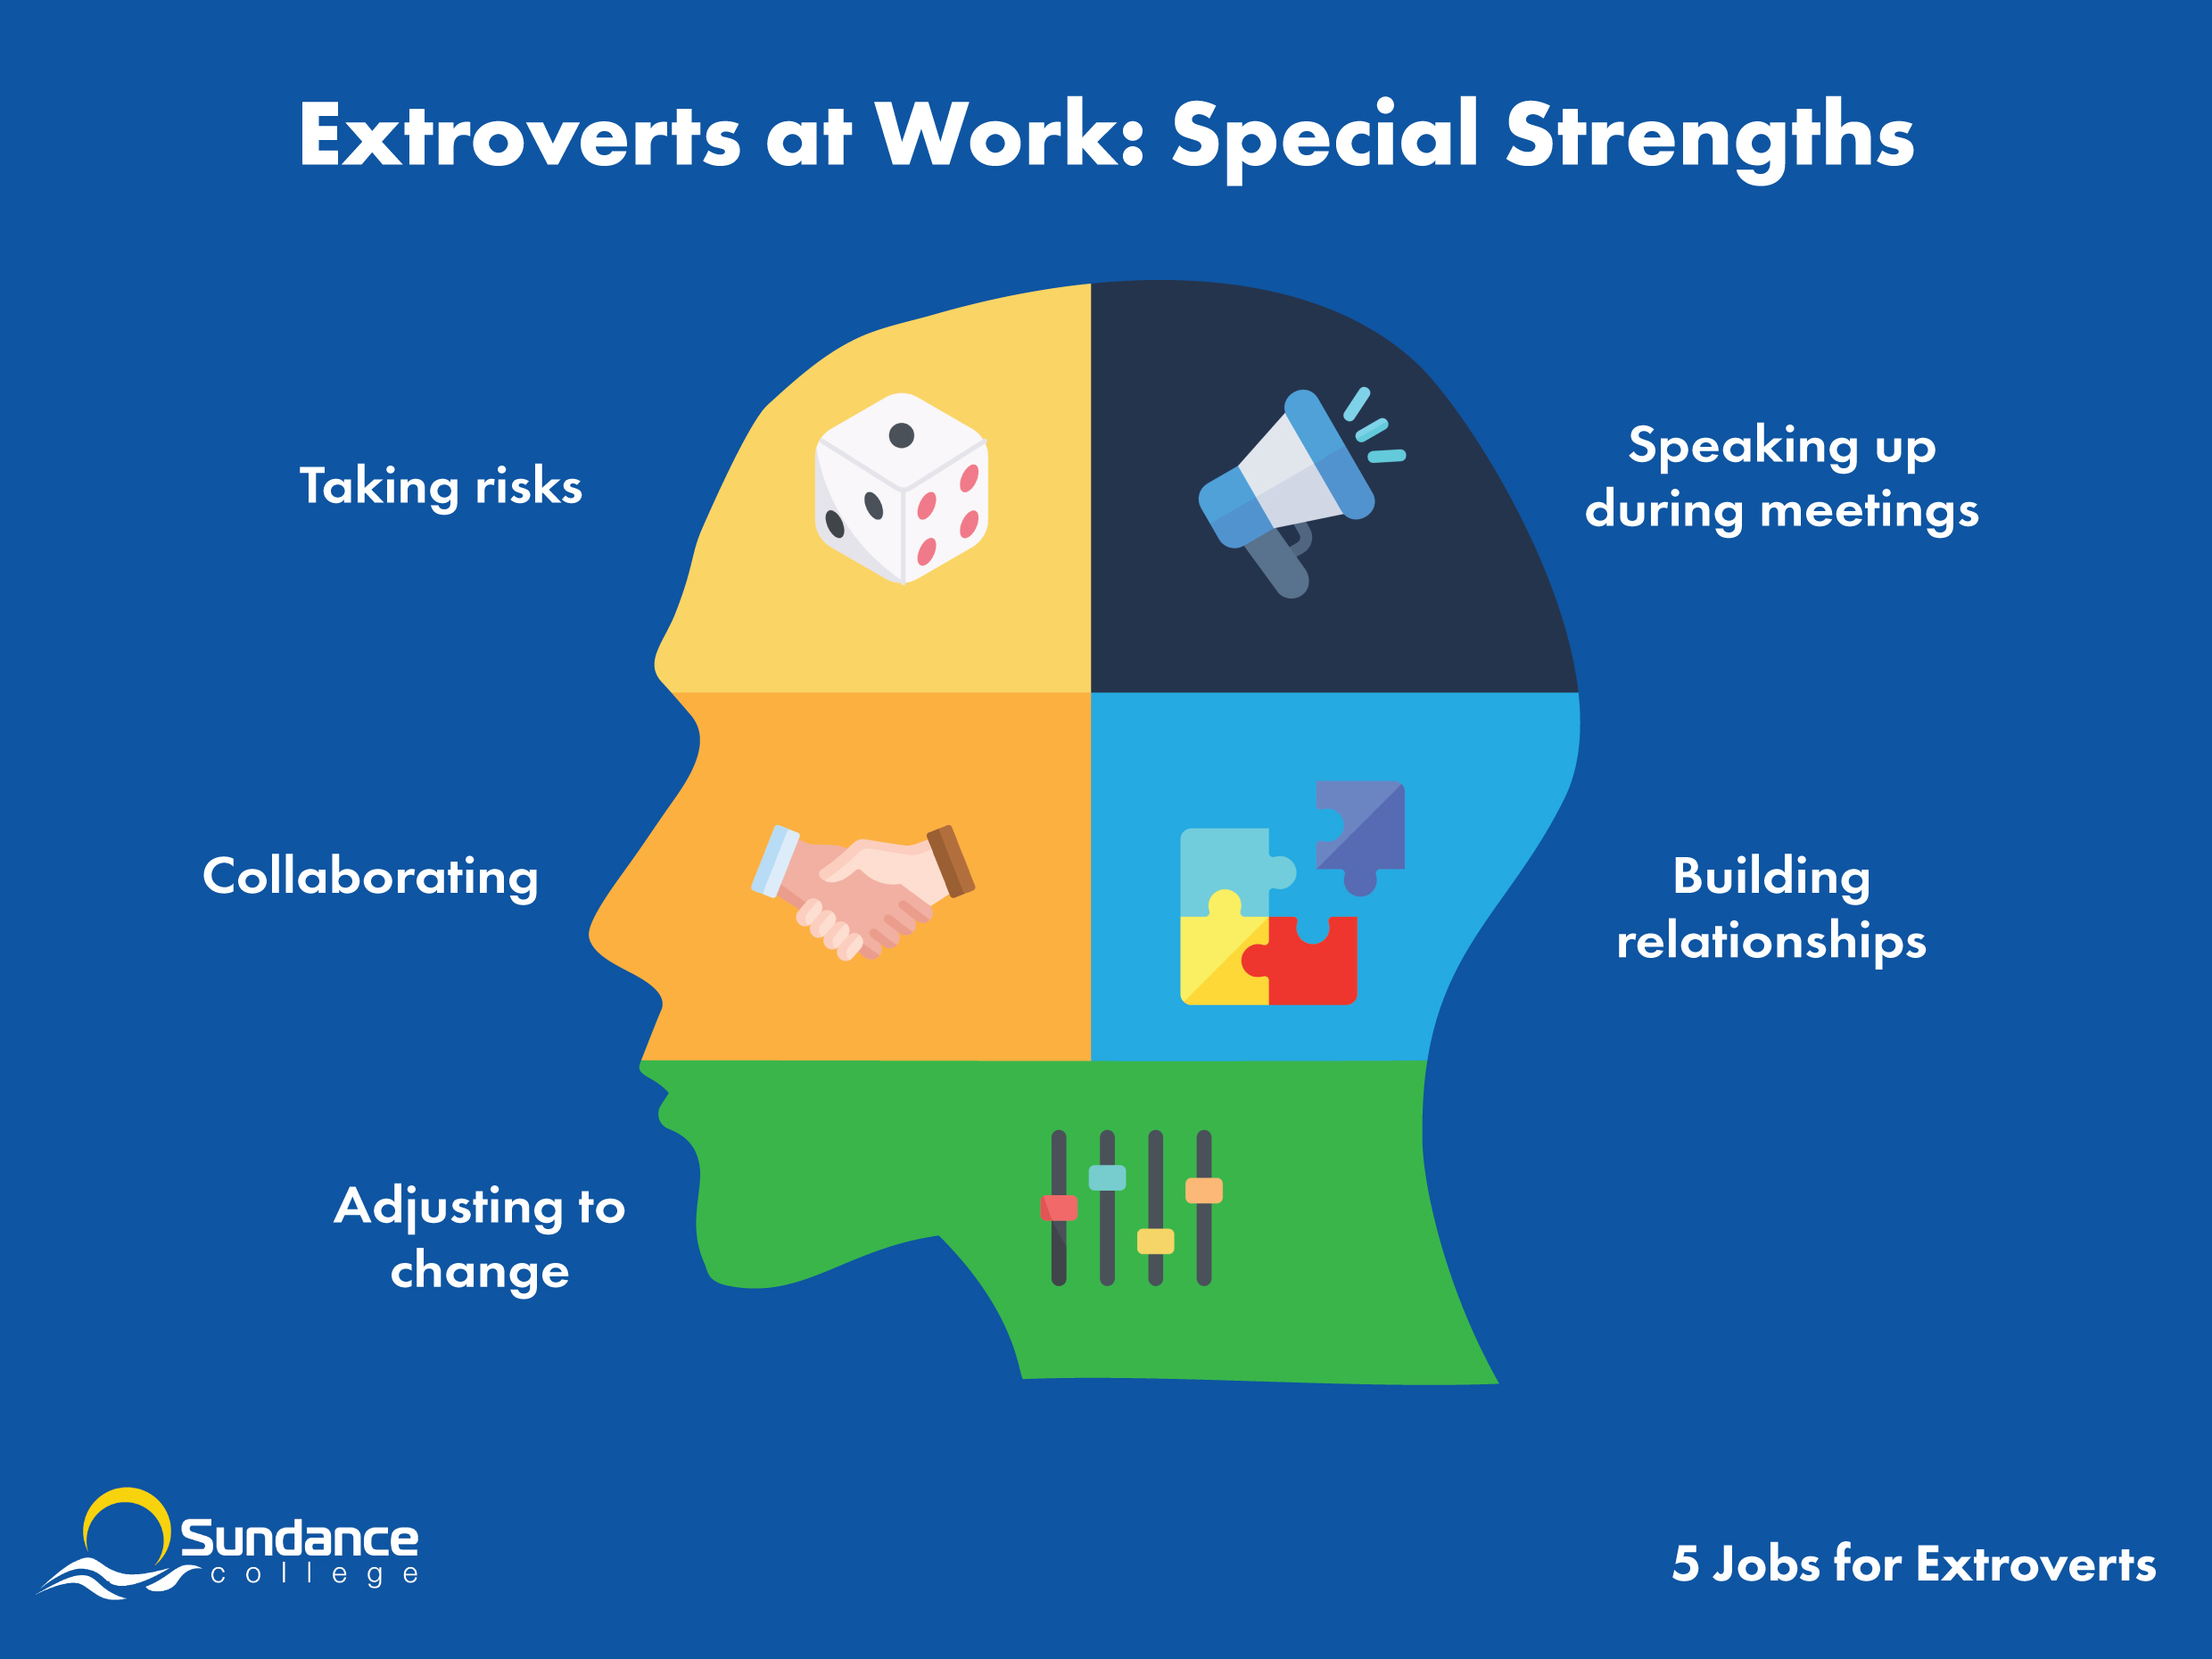 Infographic depicting special strengths of extroverts at work: taking risks, speaking up, collaborating, building relationships, and adjusting to change